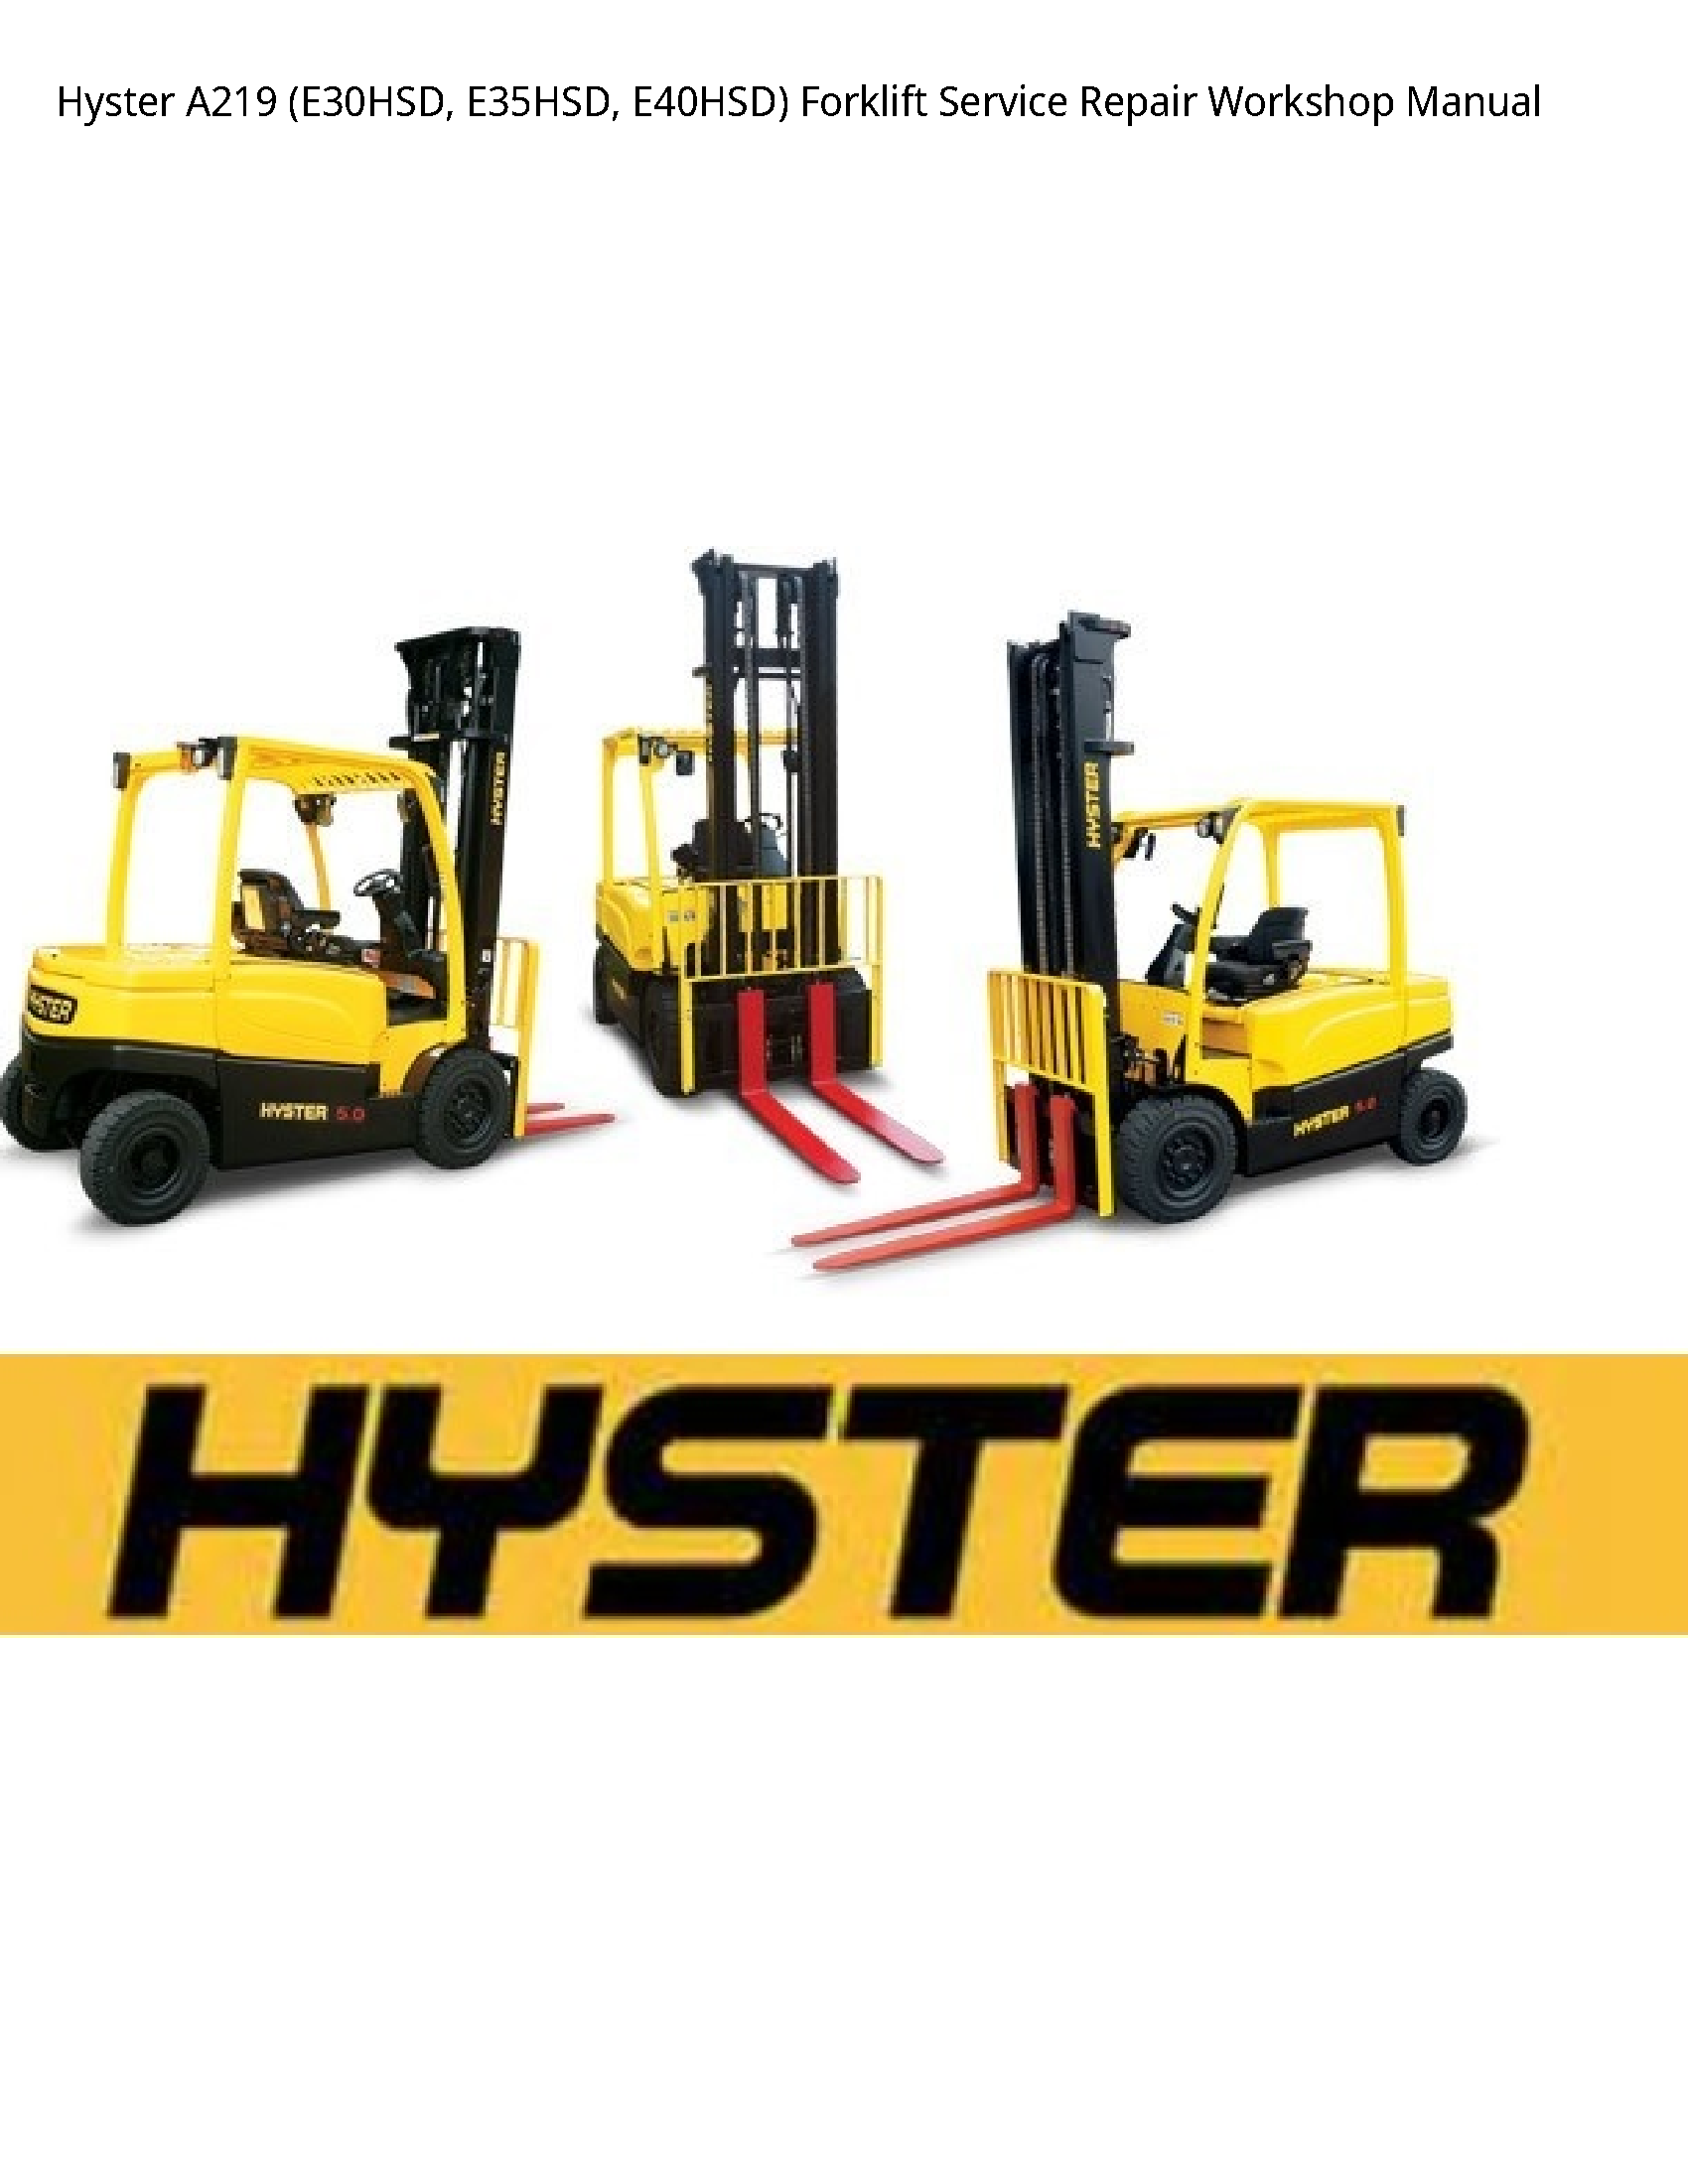 Hyster A219 Forklift manual